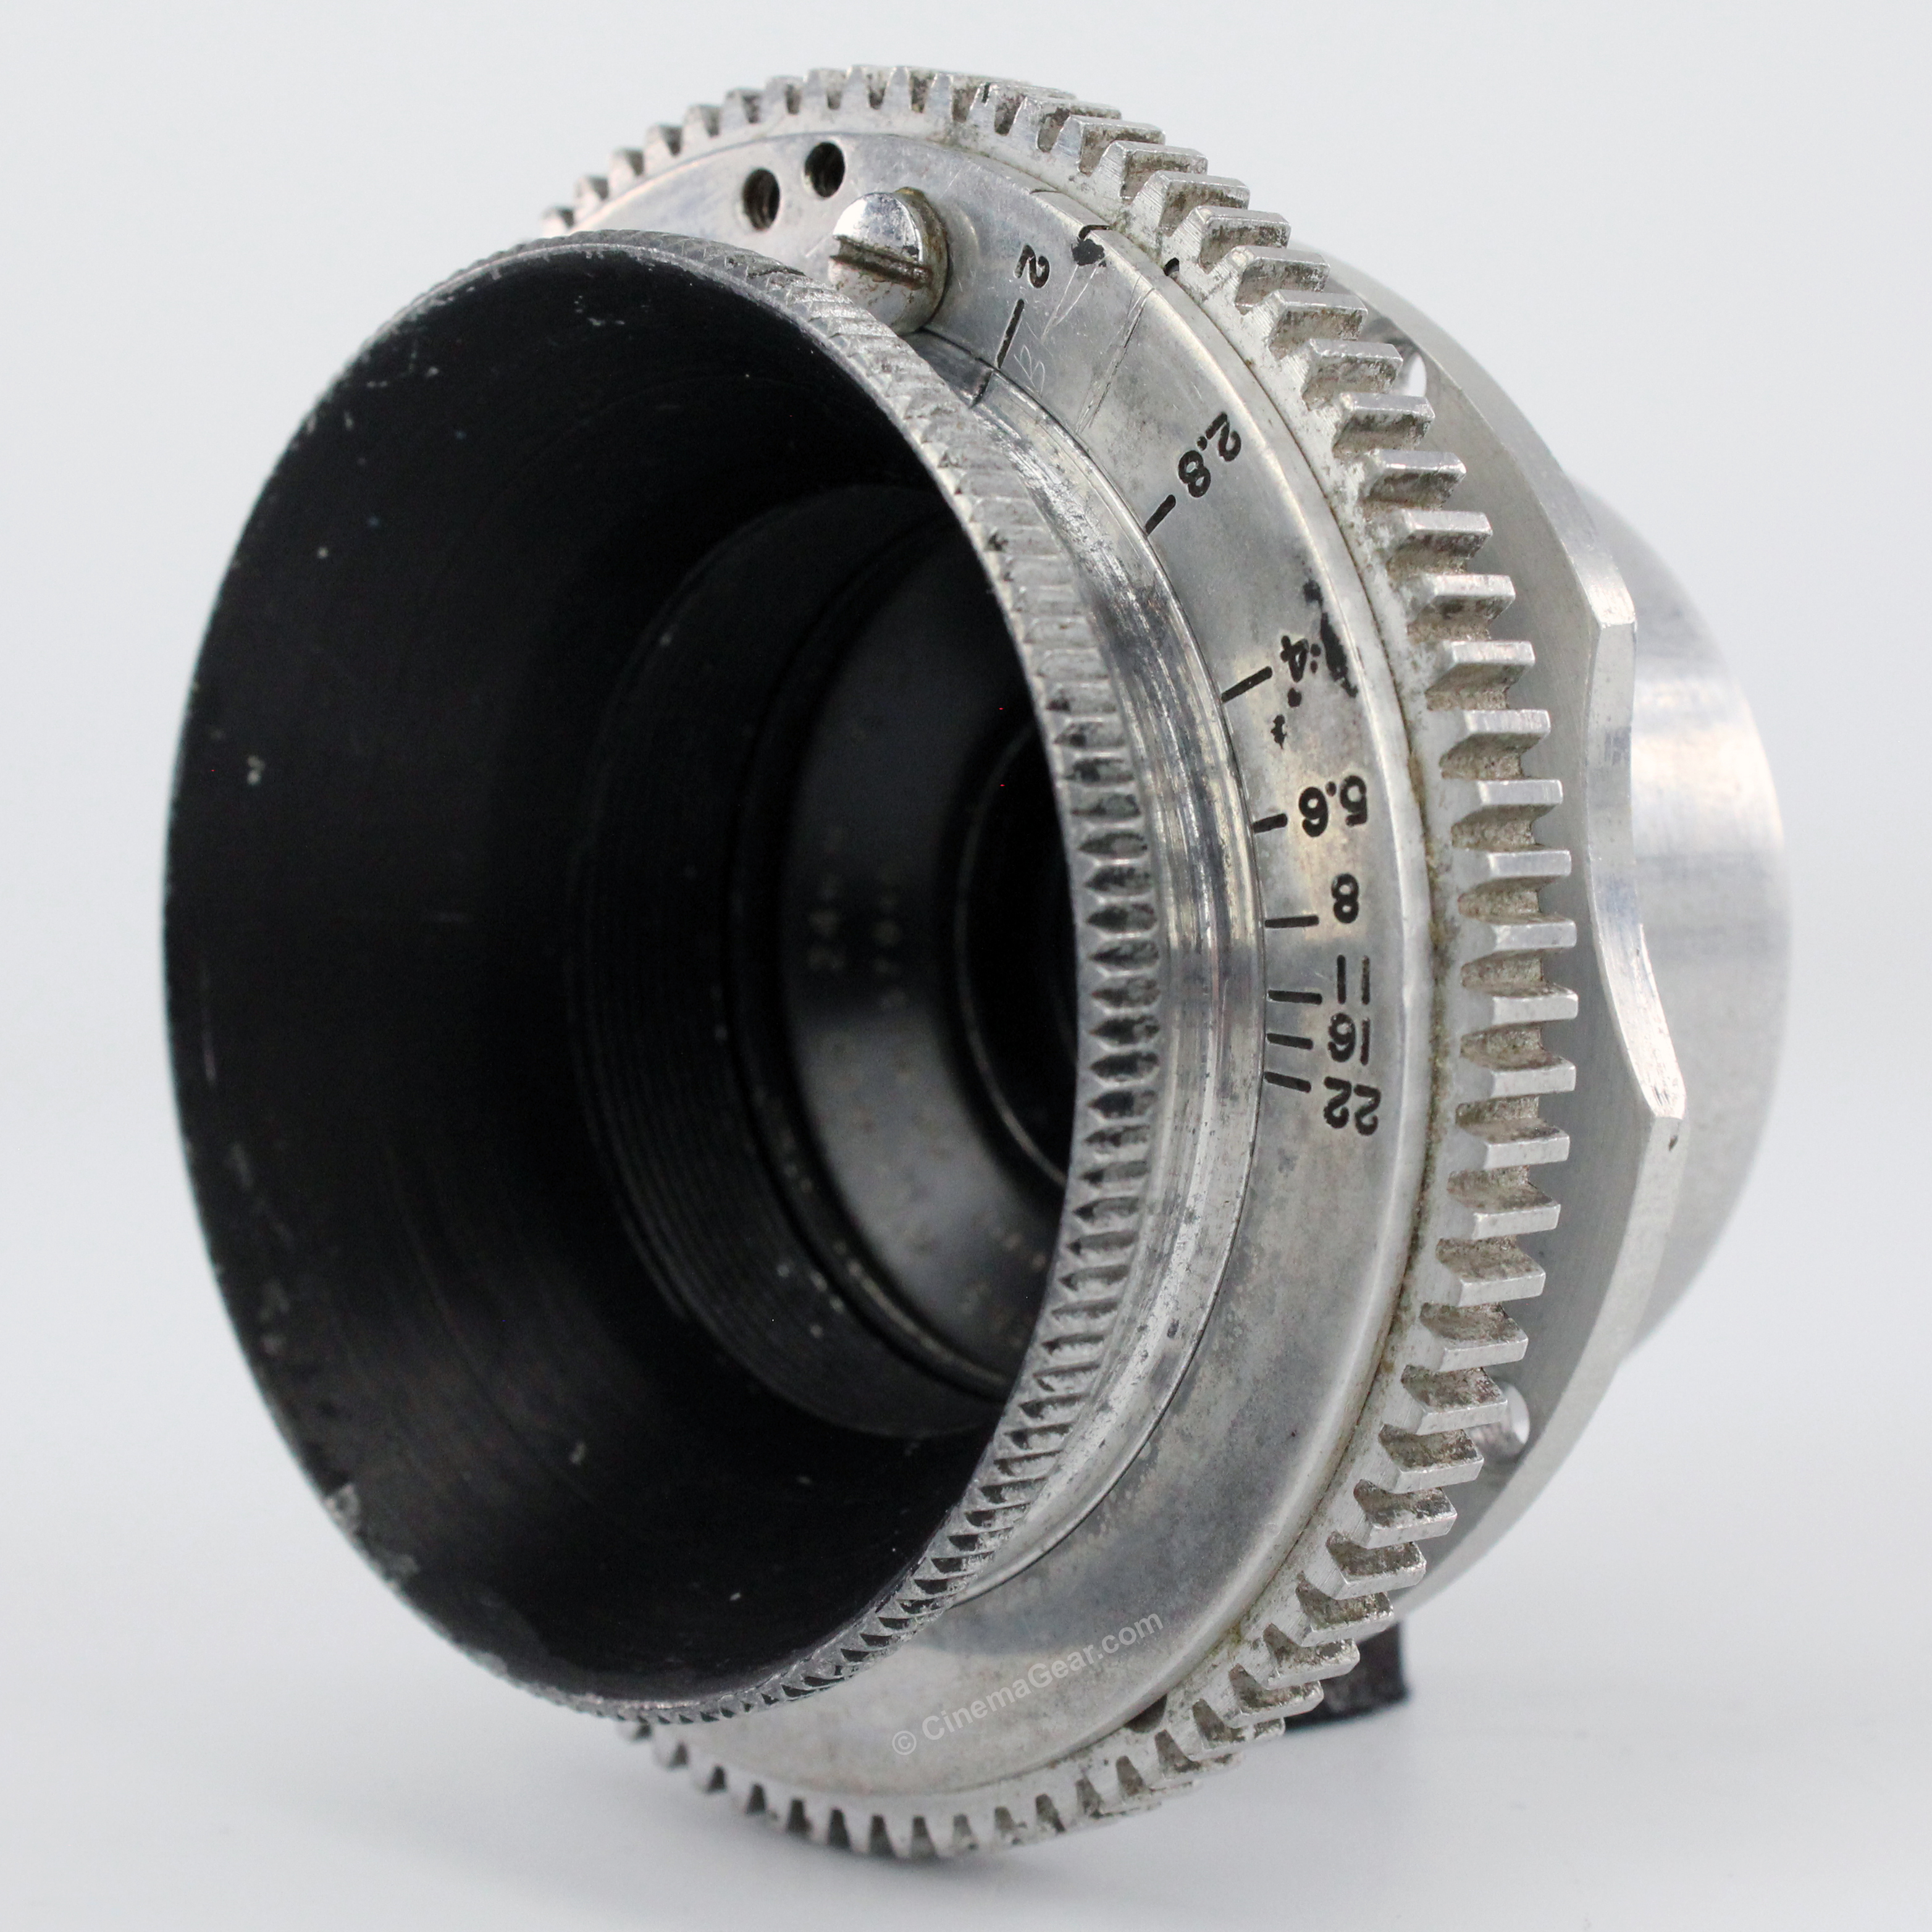 Cooke Speed Panchro 24mm f2 lens in Mitchell Standard mount.